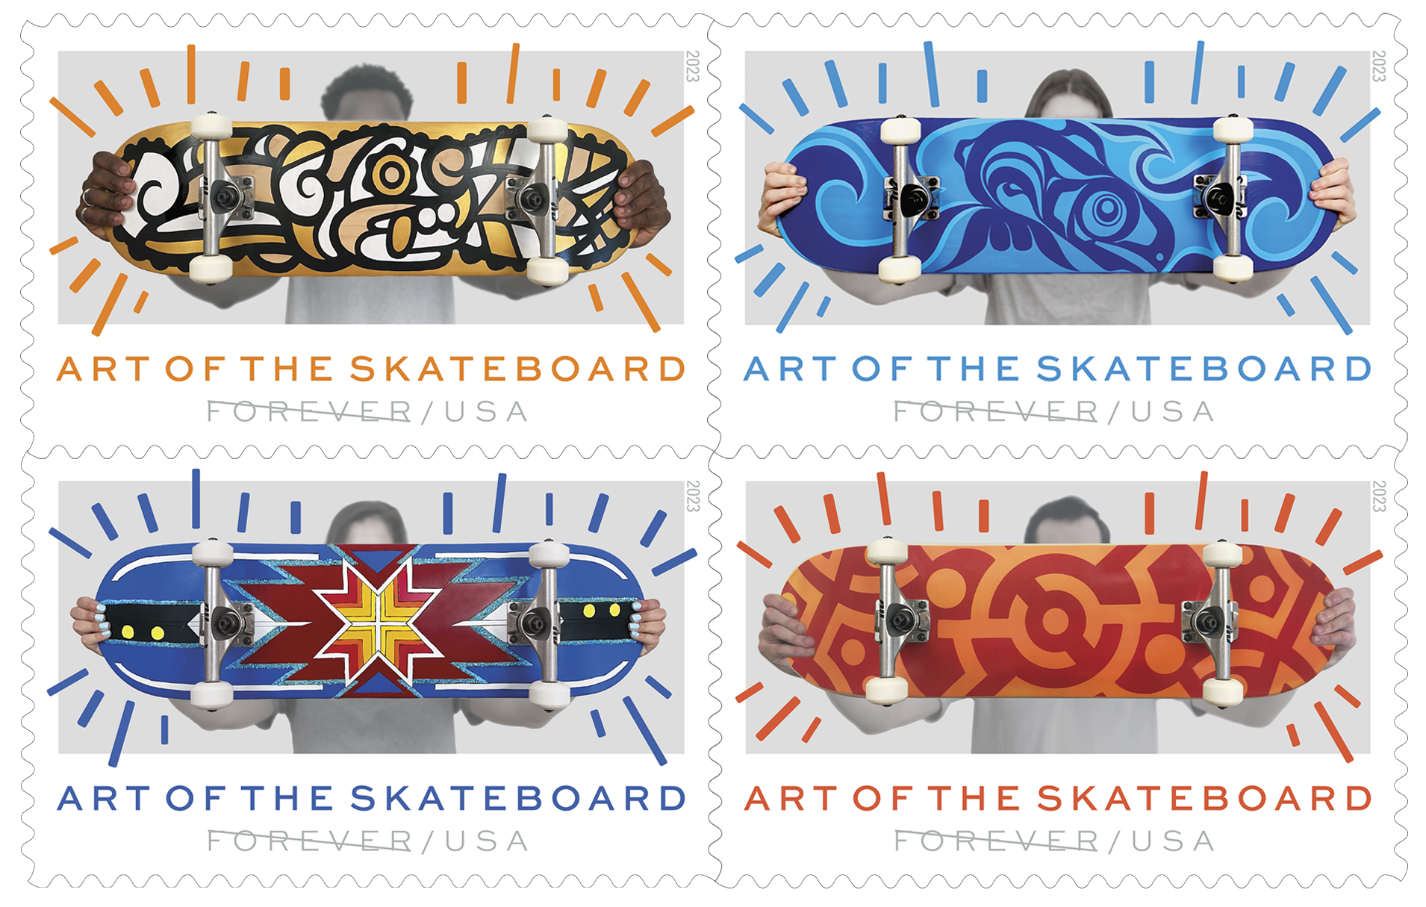 usps art of the skateboard stamps